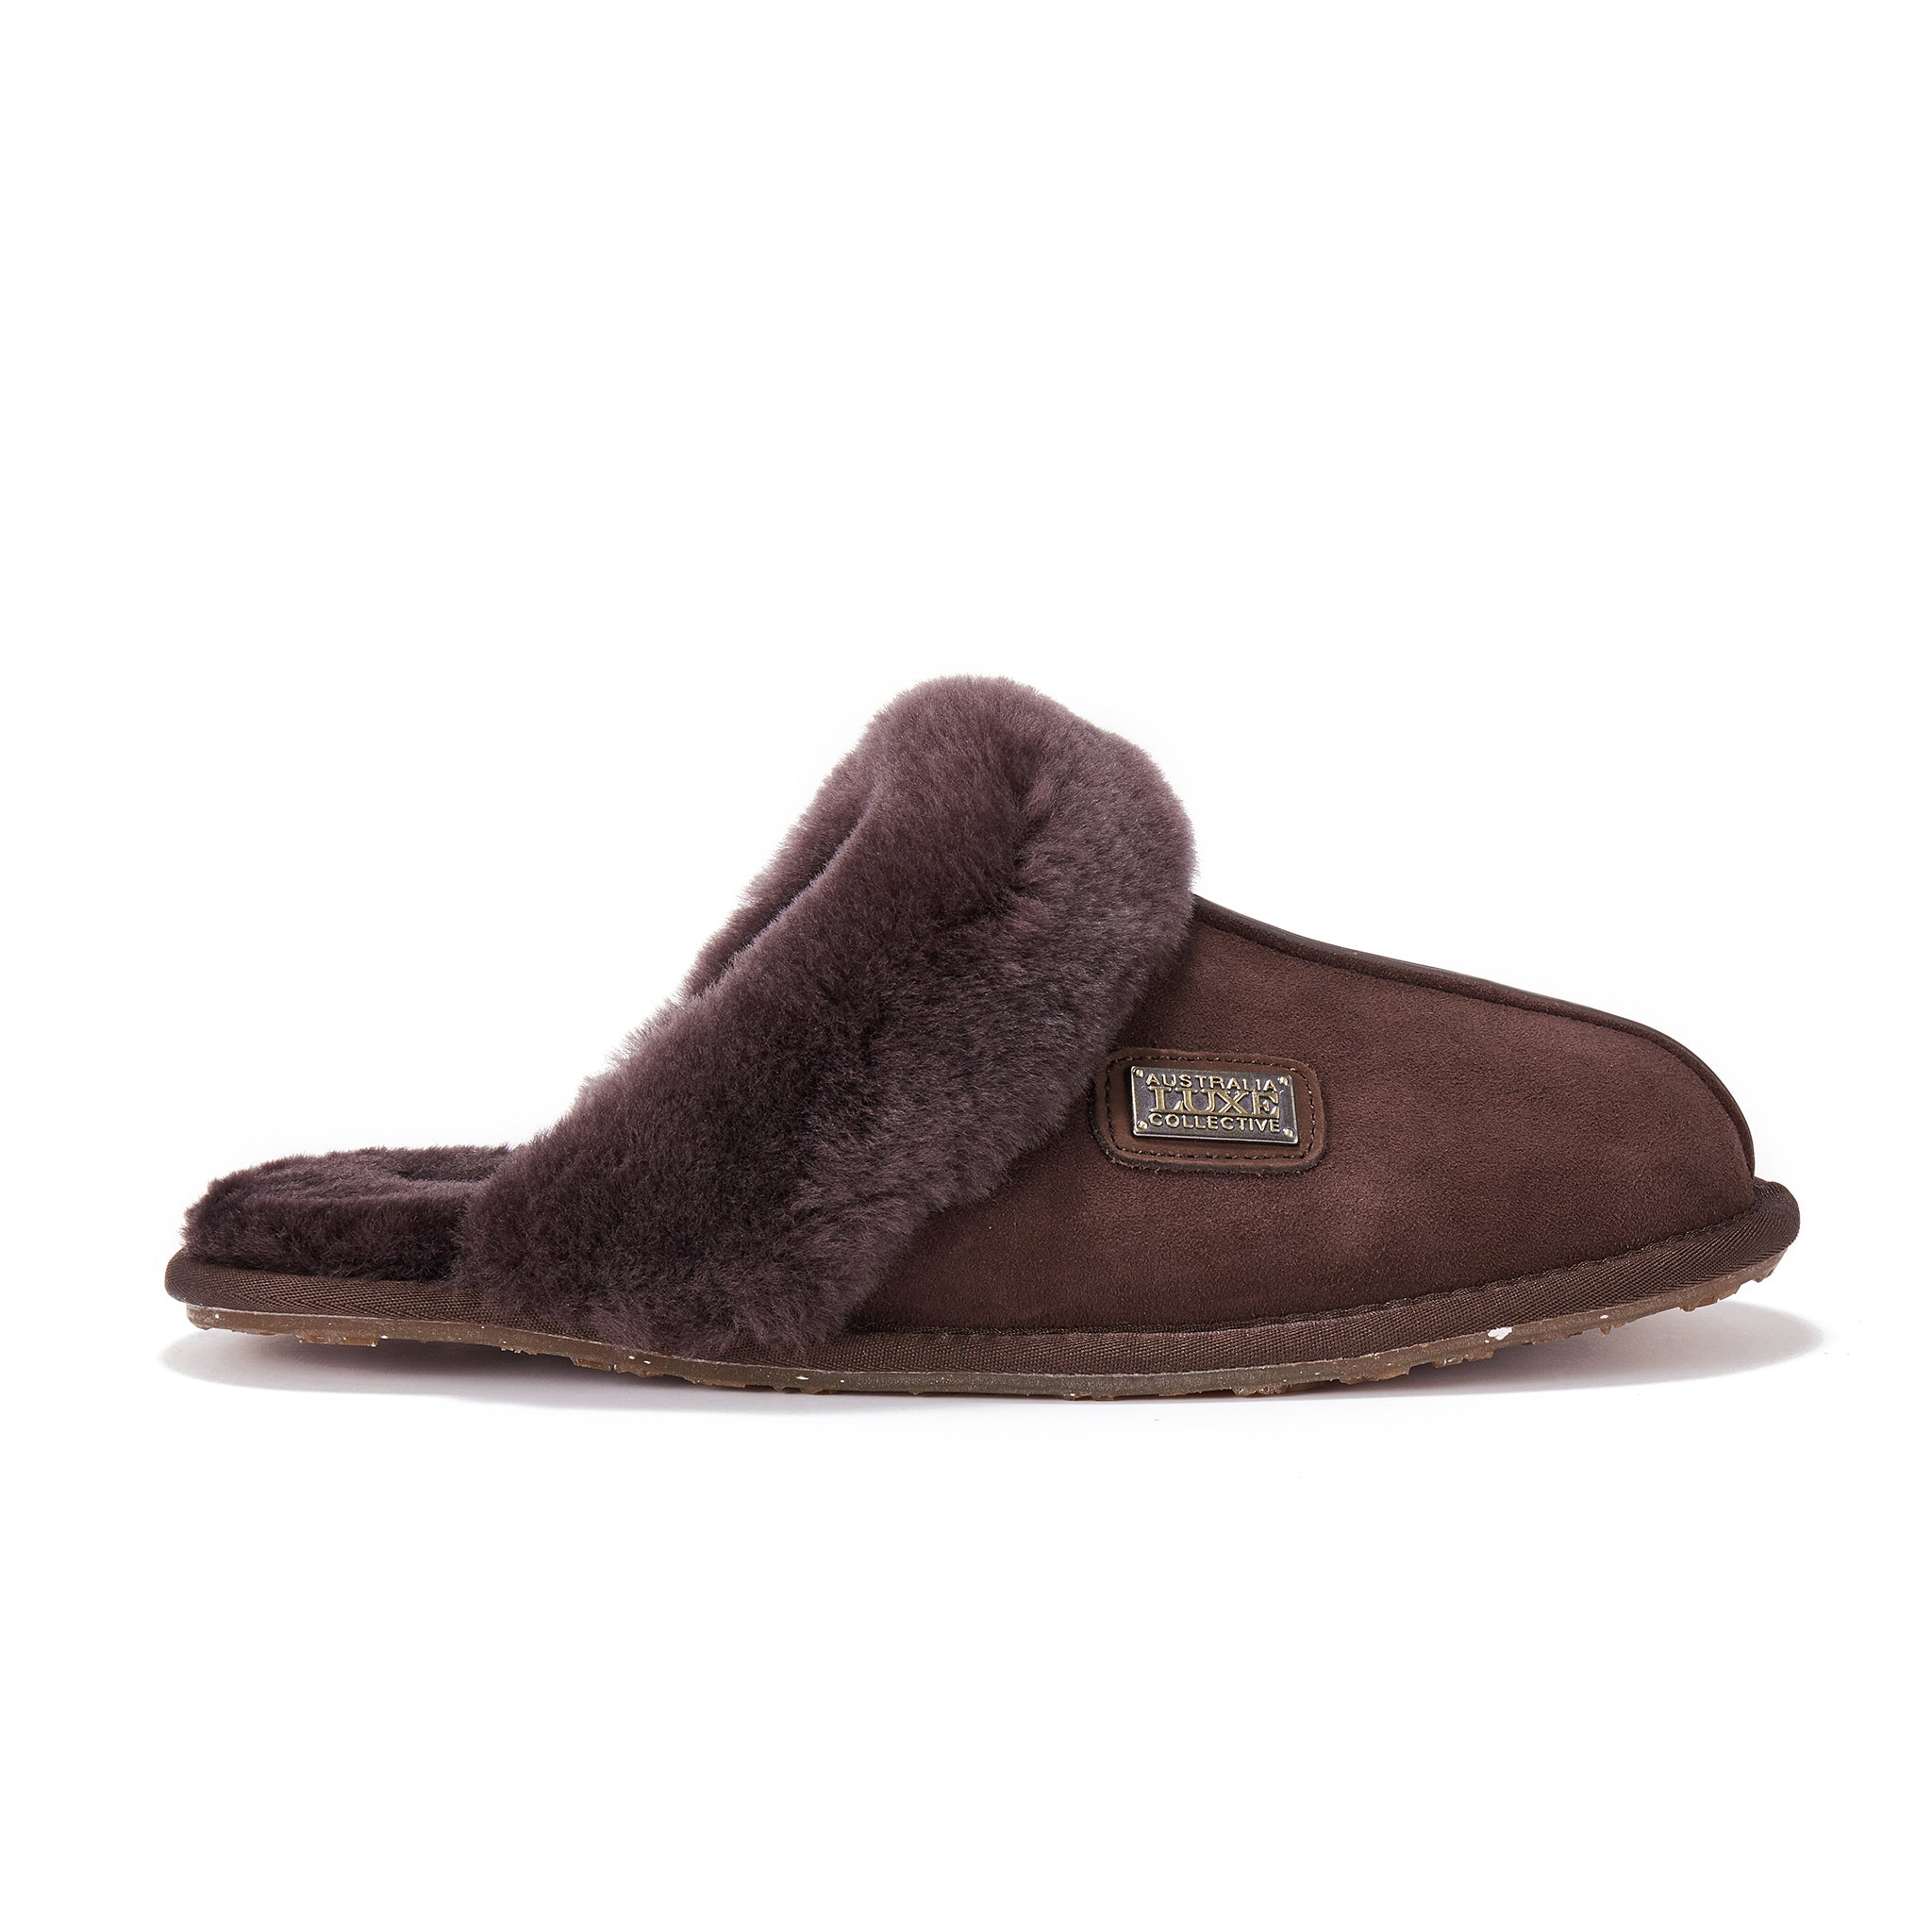 Australia Luxe Collective Slippers